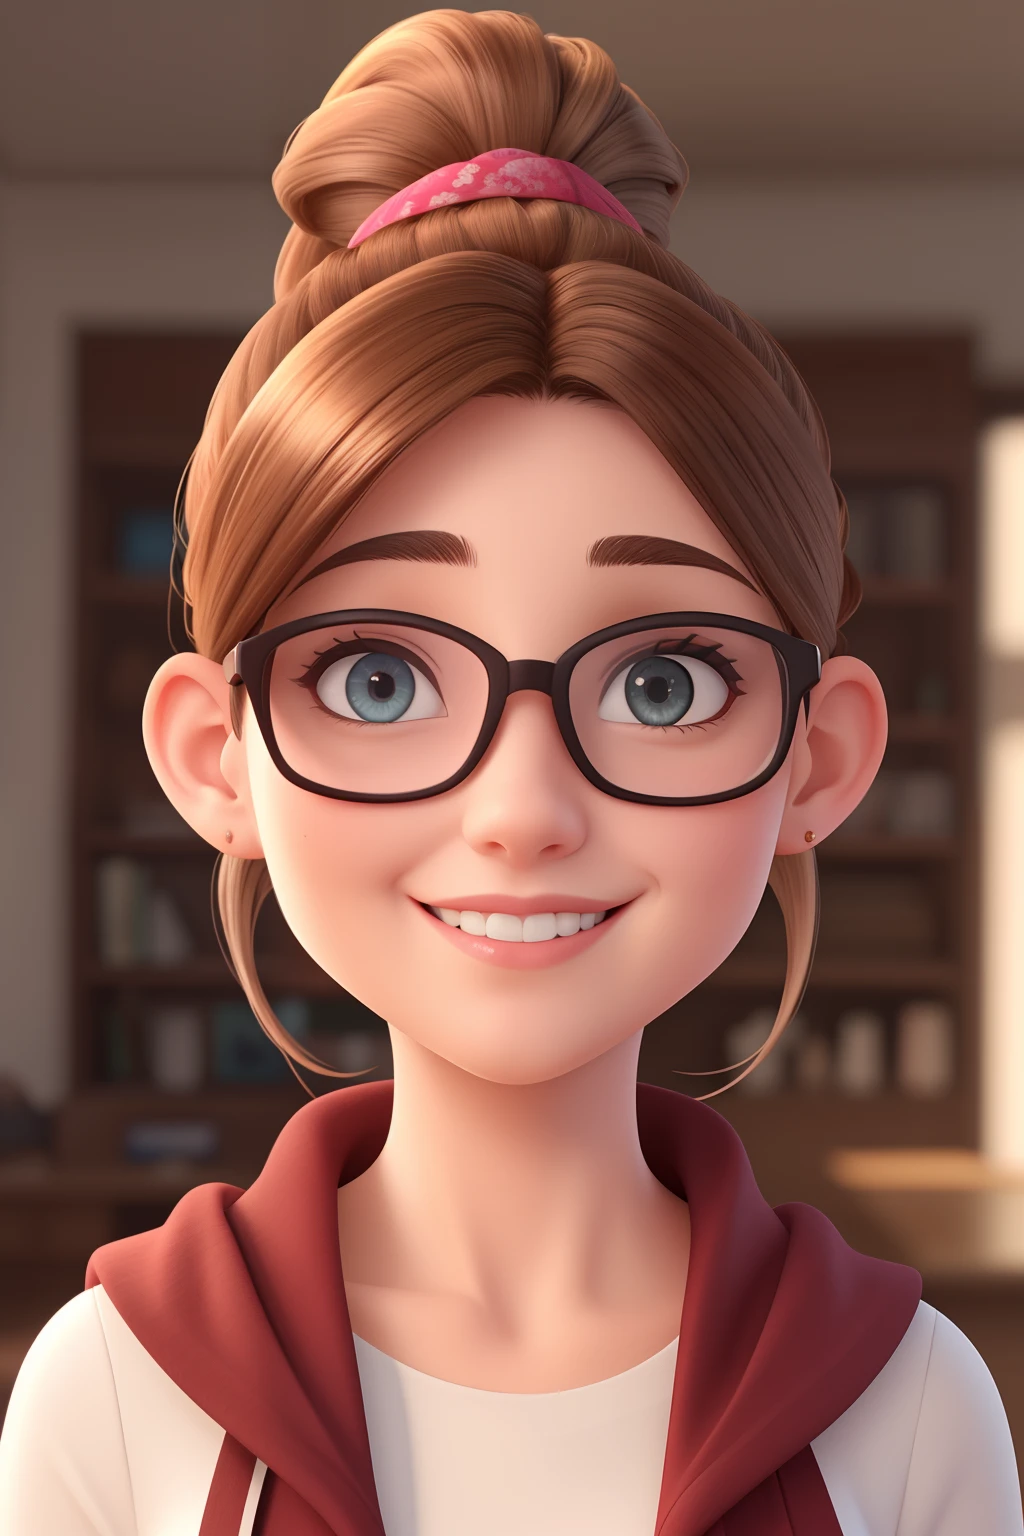 A 34 year old woman, with short brown hair, Round face, round face with charming smile, and light brown eyes, wears glasses and a ponytail, wearing glasses.